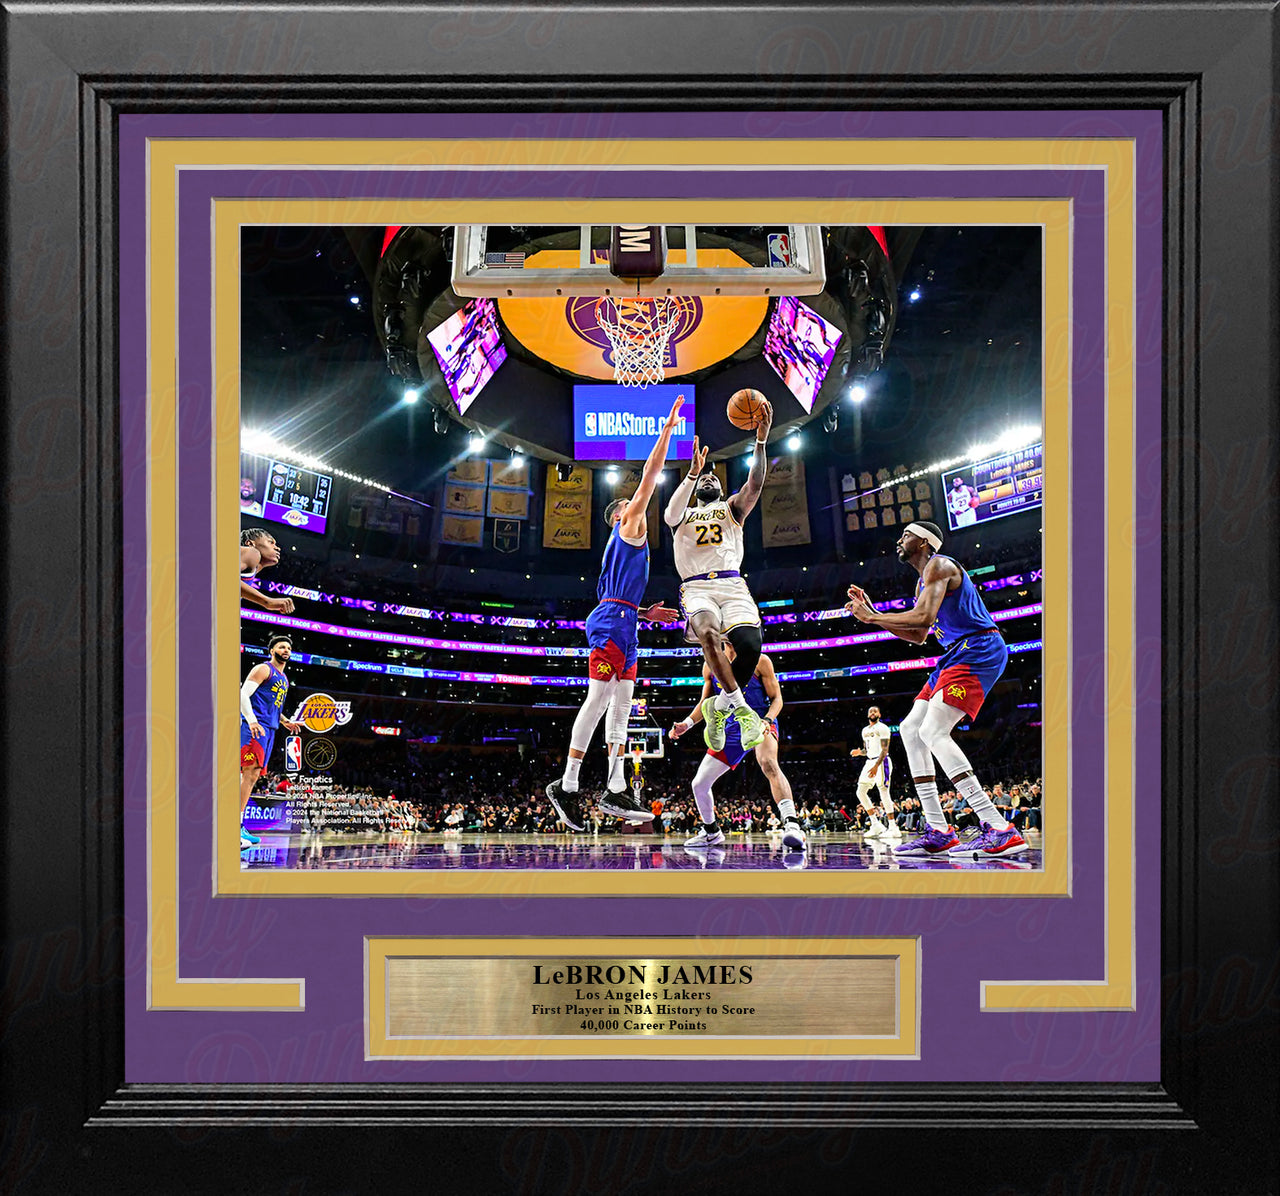 LeBron James 1st Player to Score 40,000 Points Los Angeles Lakers 8" x 10" Framed Basketball Photo